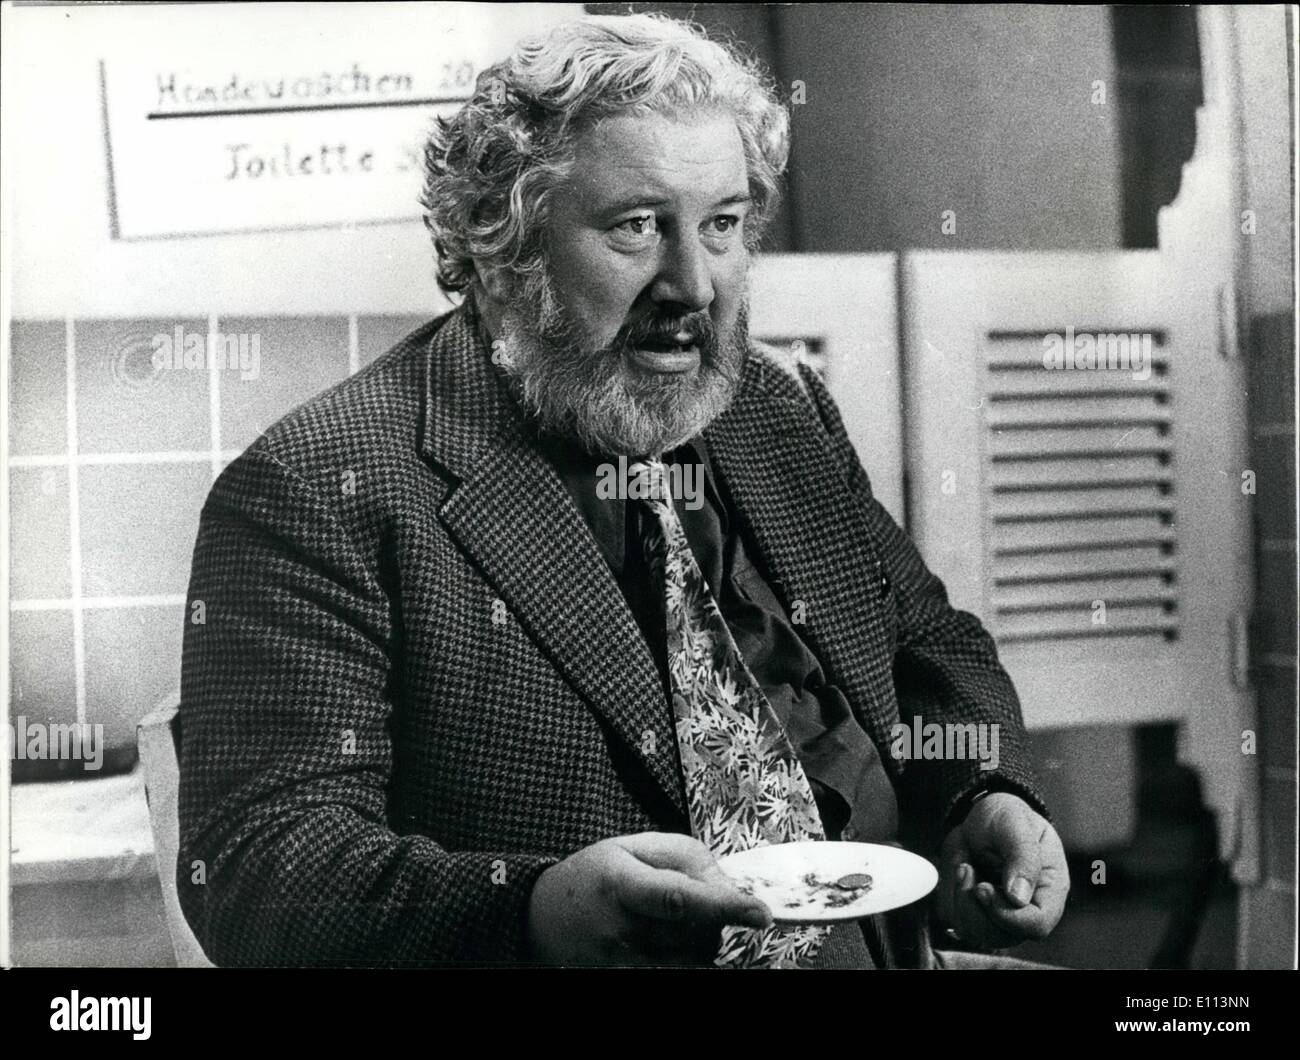 Oct. 10, 1975 - Peter Ustinov the ''Toilet Attendant'': Peter Ustinov will be seen as a ''toilet attendant'' on the German television screens. The famous actor, writer, director and producer, is currently making a one-man show in Hamburg to be shown on New Year's Eve. He will be pointing out some important and less important happenings of the year 1975, adding a touch of his well-known sense of humour. In one part of the show he will be seated in a public toilet, playing the part of the attendant. Photo shows Peter Ustinov as a 'toilet attendant' as he appears in his show. Stock Photo